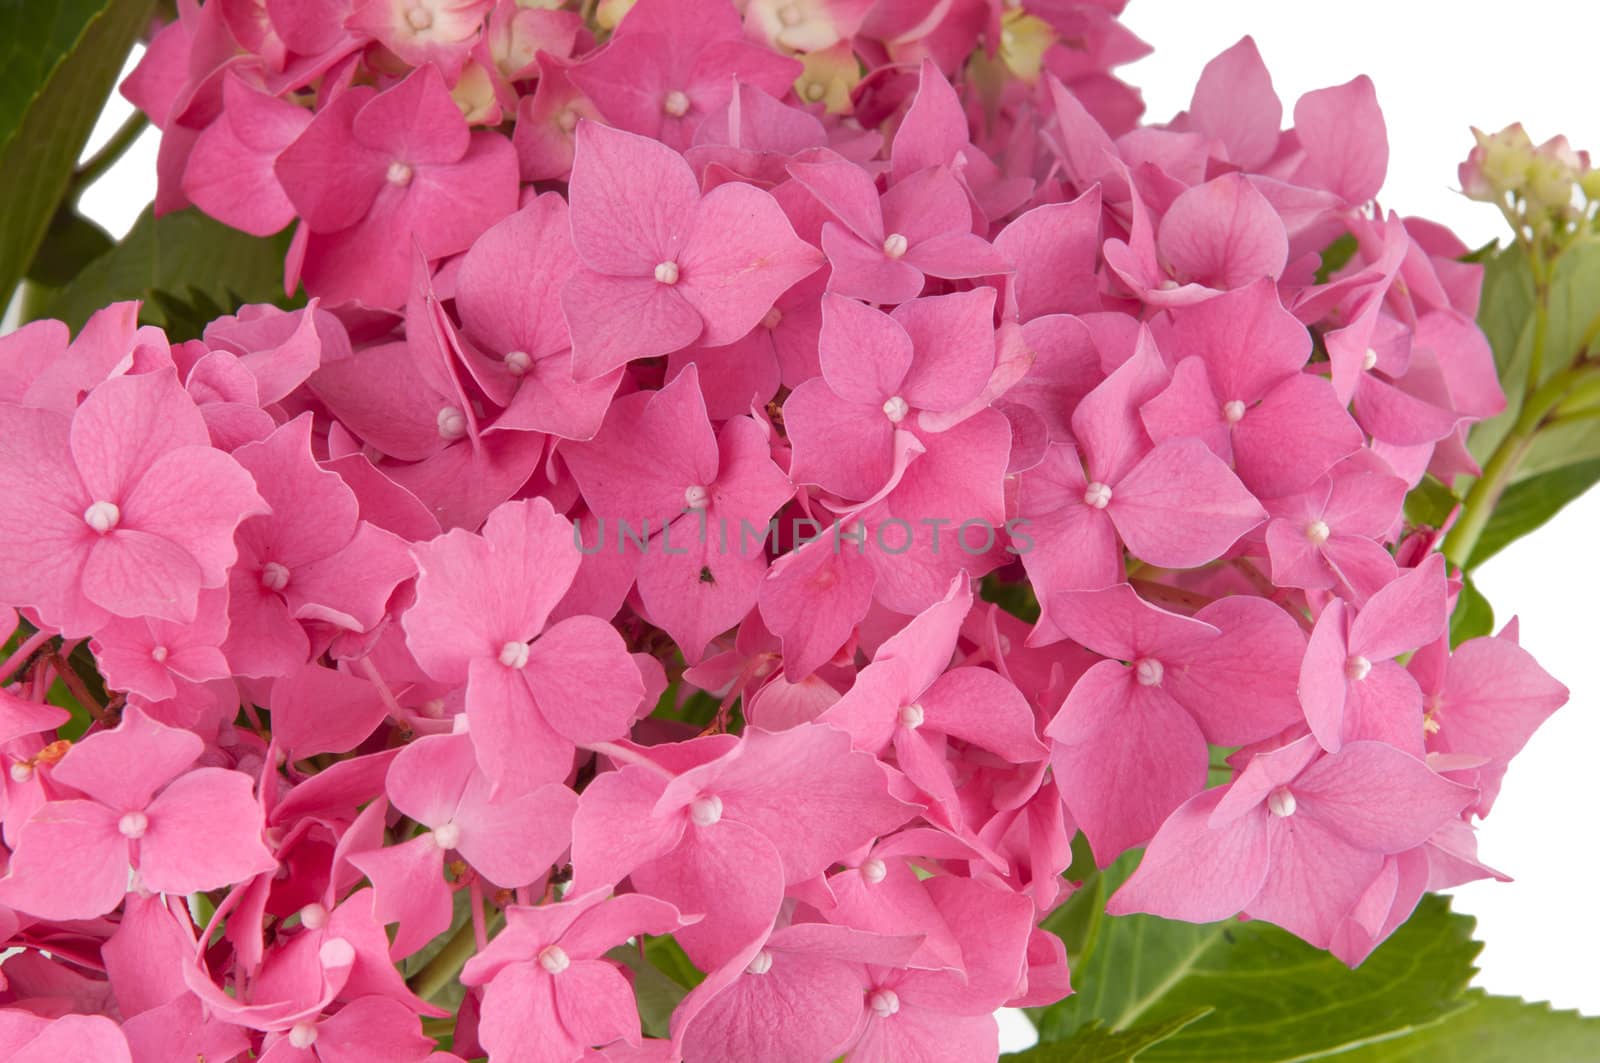 hydrangea flowers (close-up view) by bigmagic